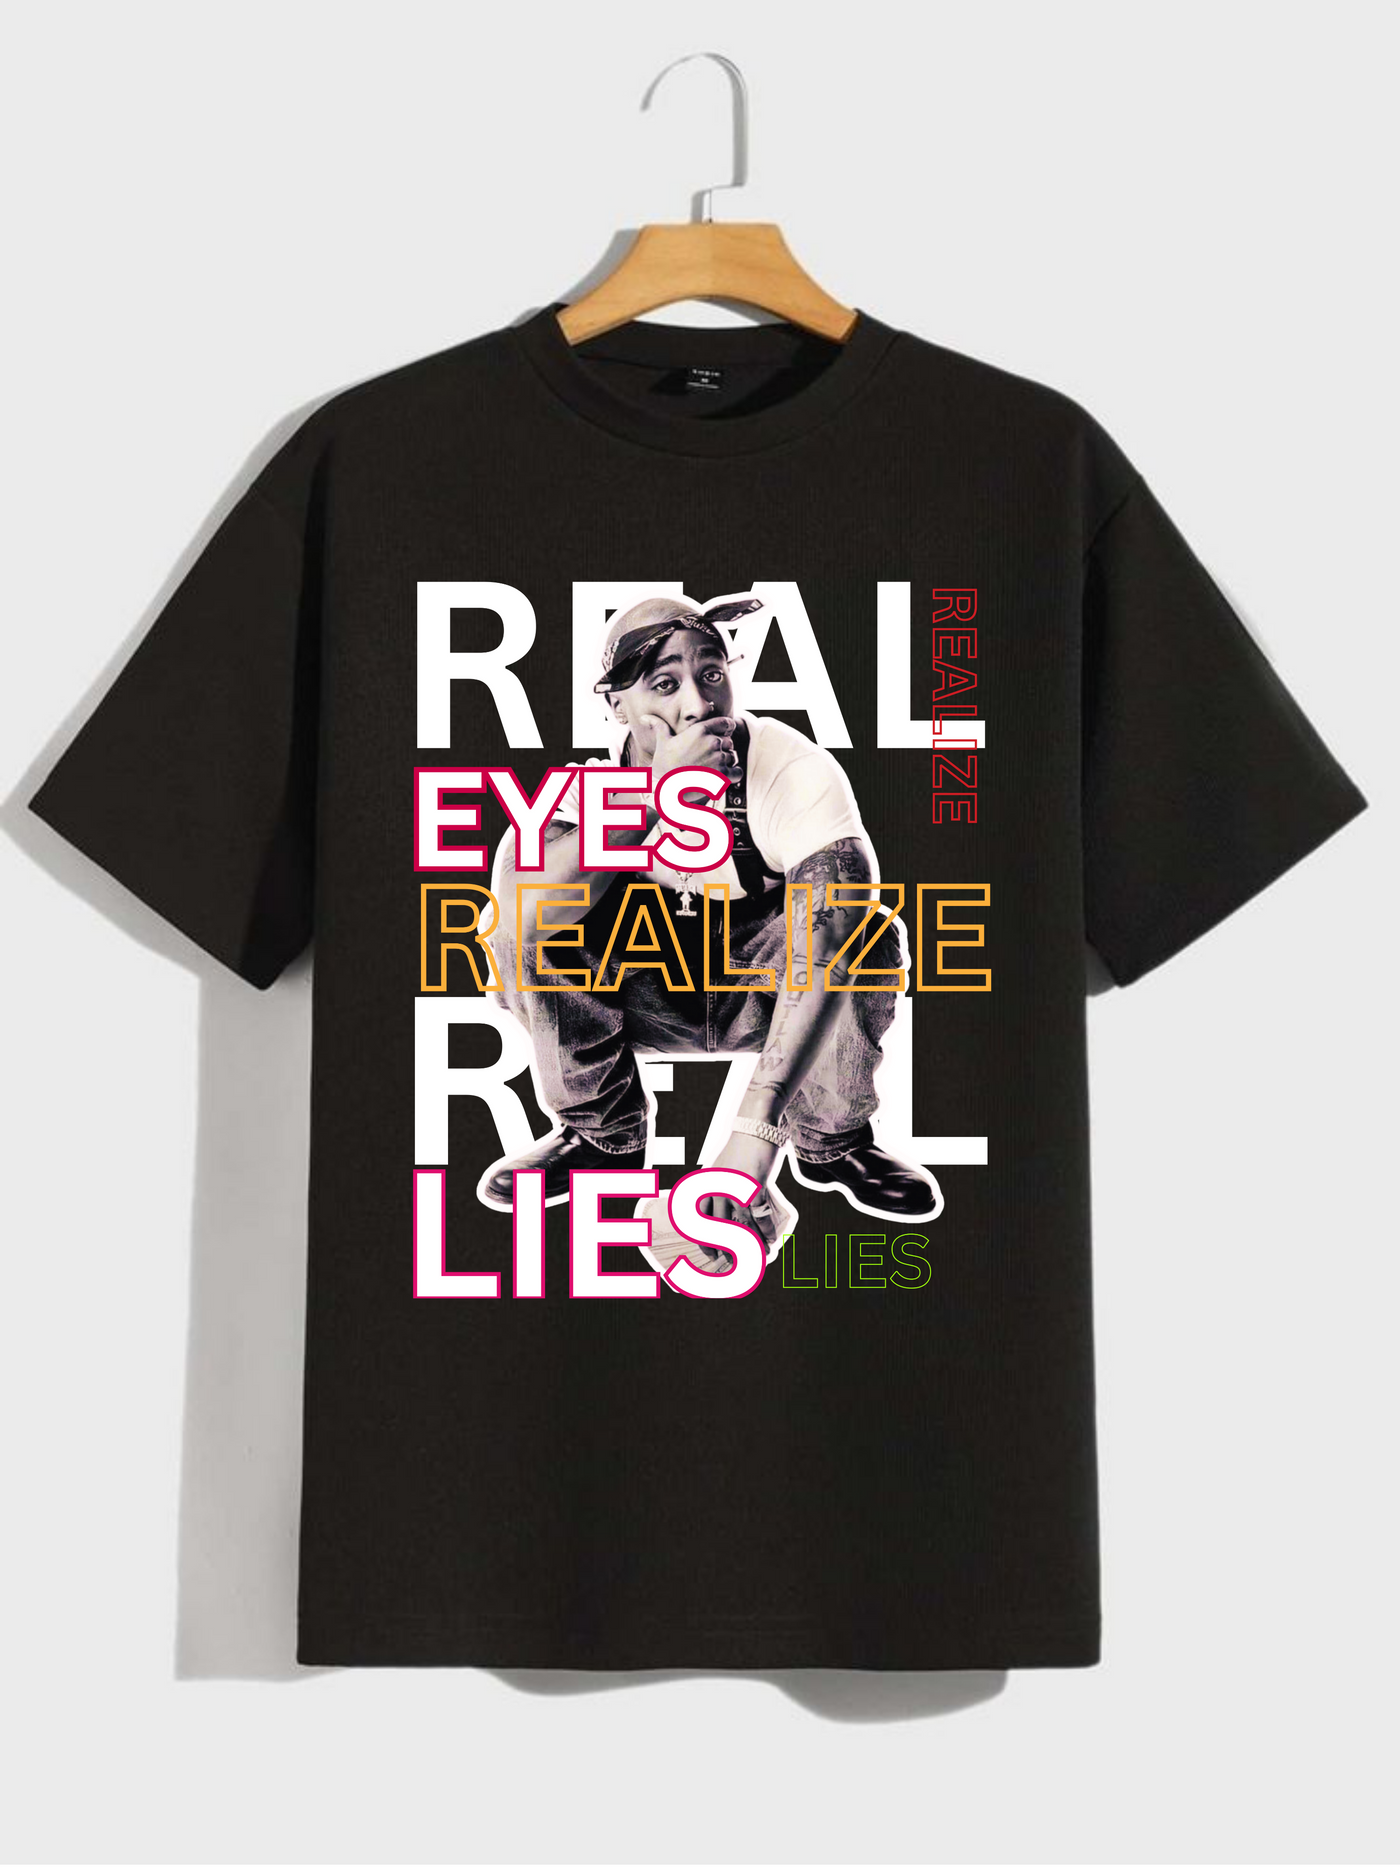 REAL EYES REALIZE